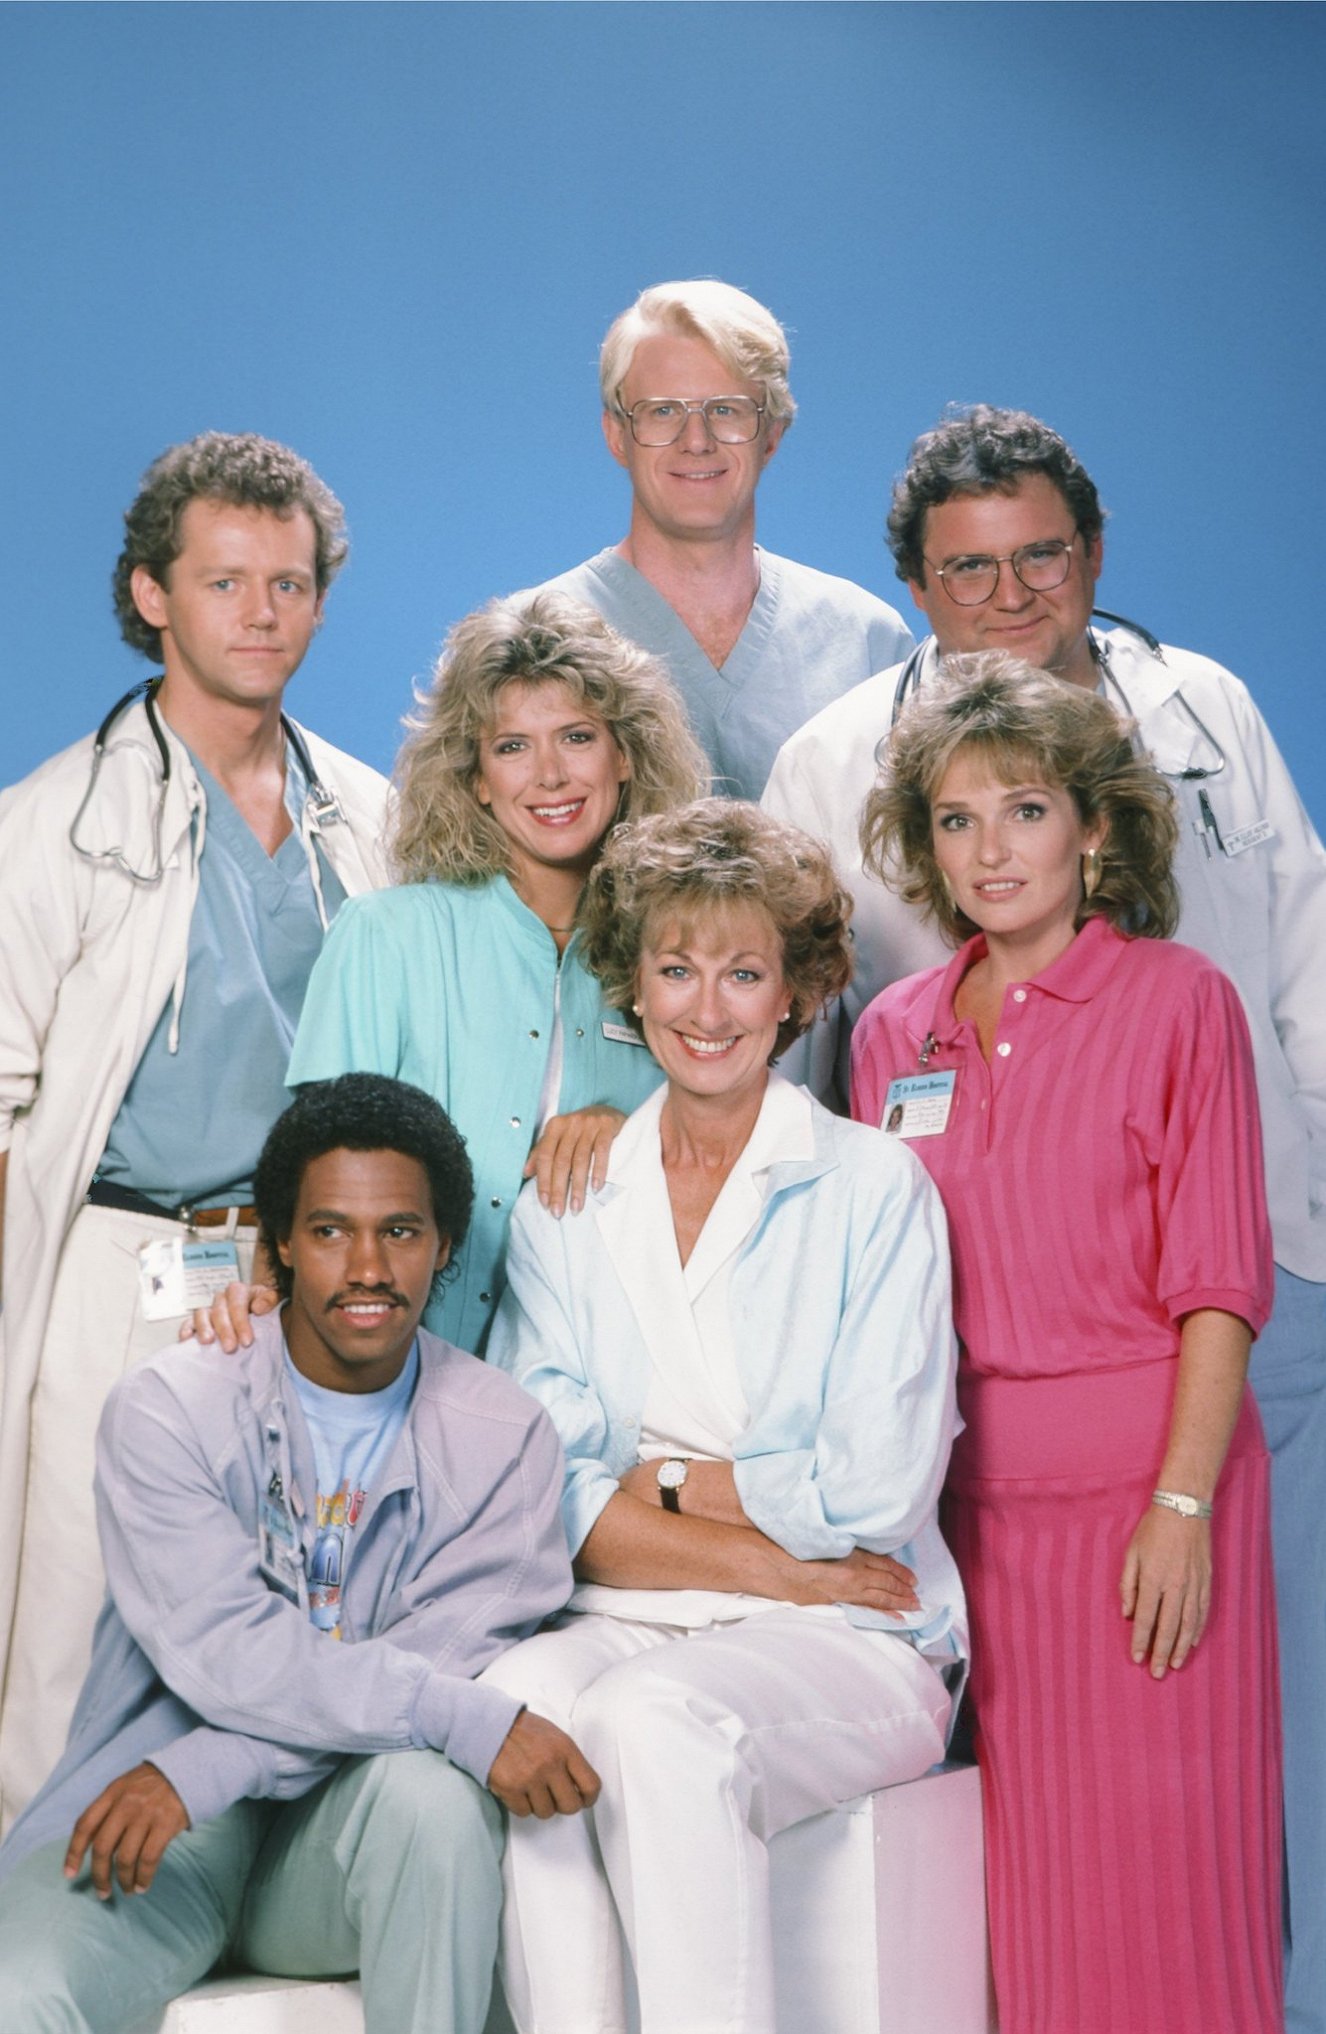 st. elsewhere theme song